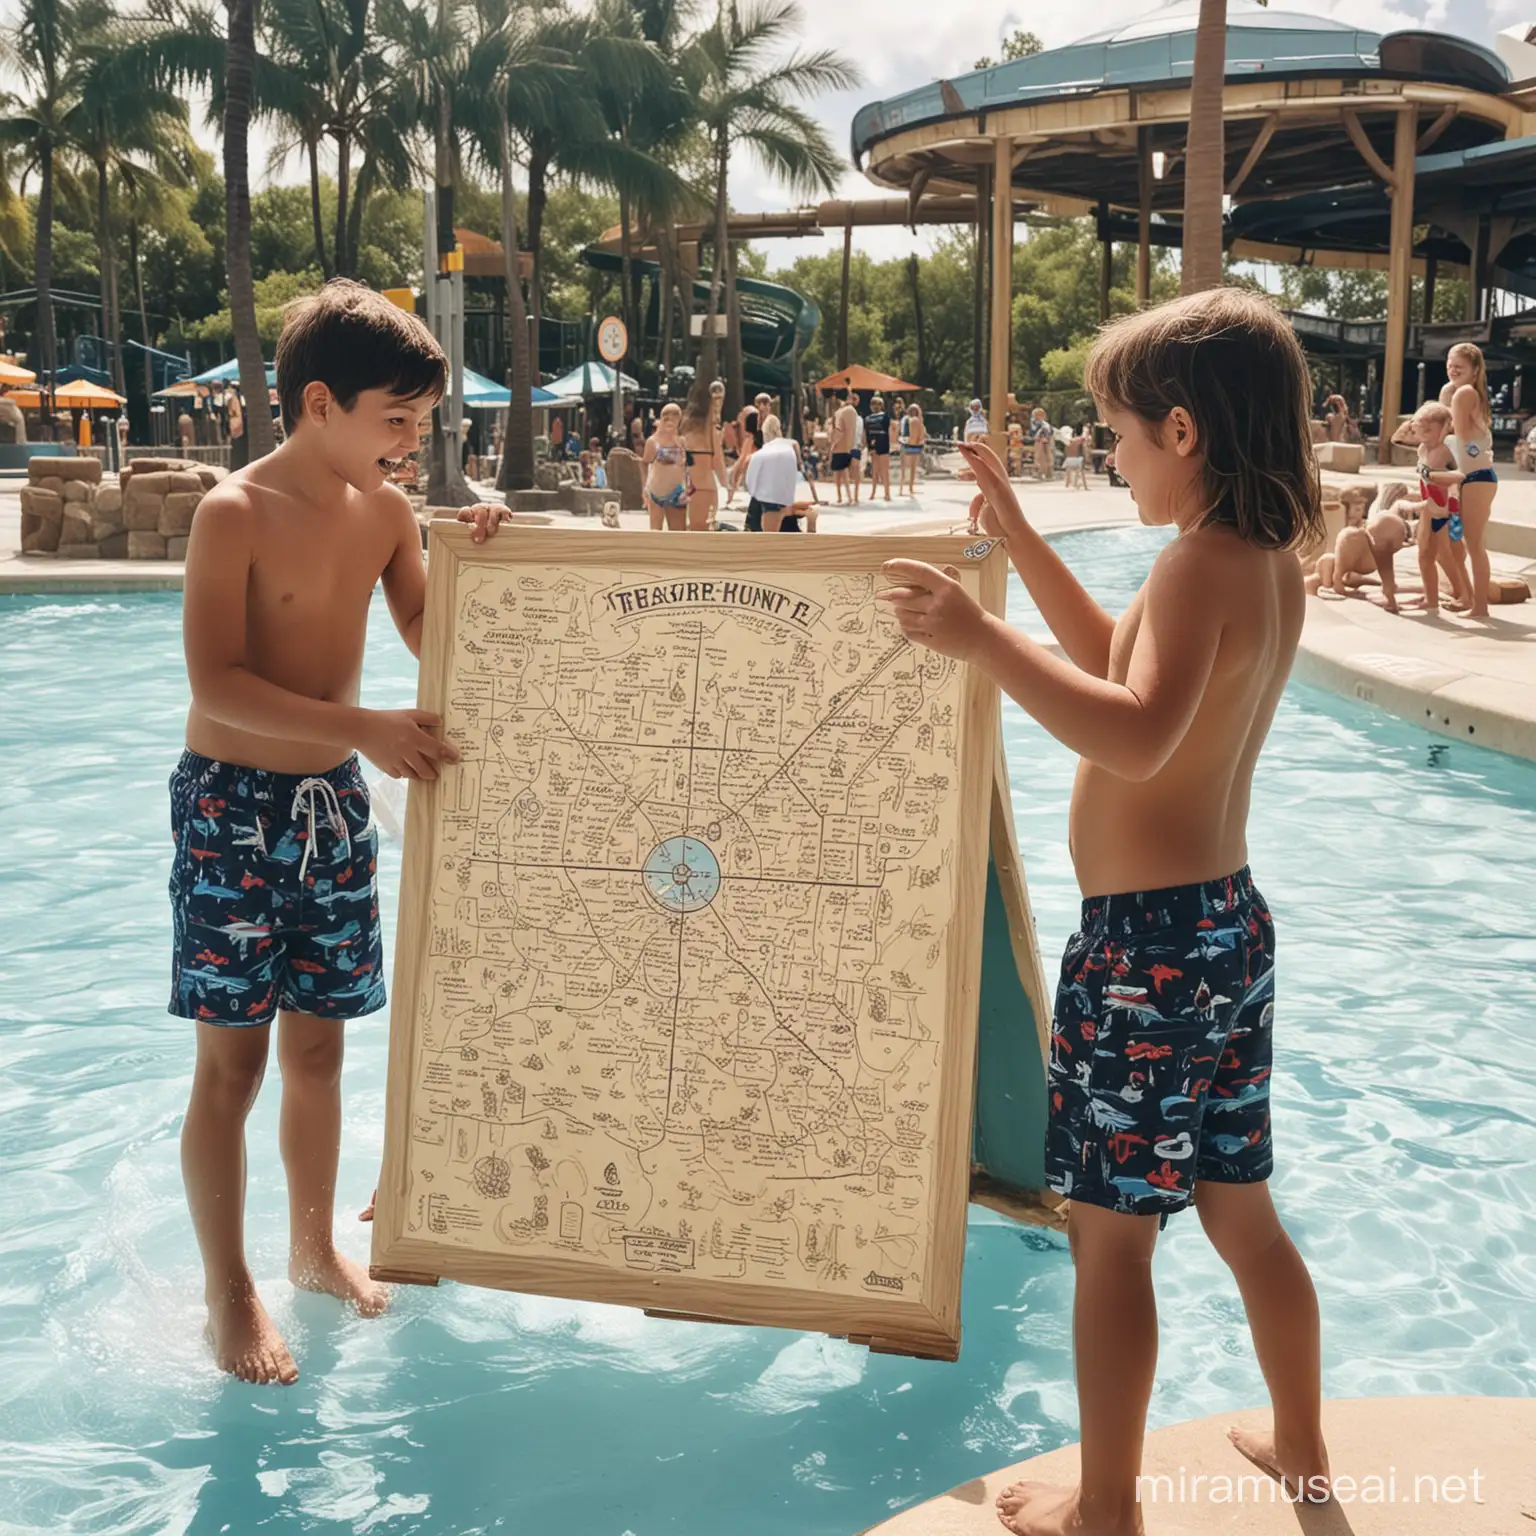 Exciting Treasure Hunt Game at the Water Park